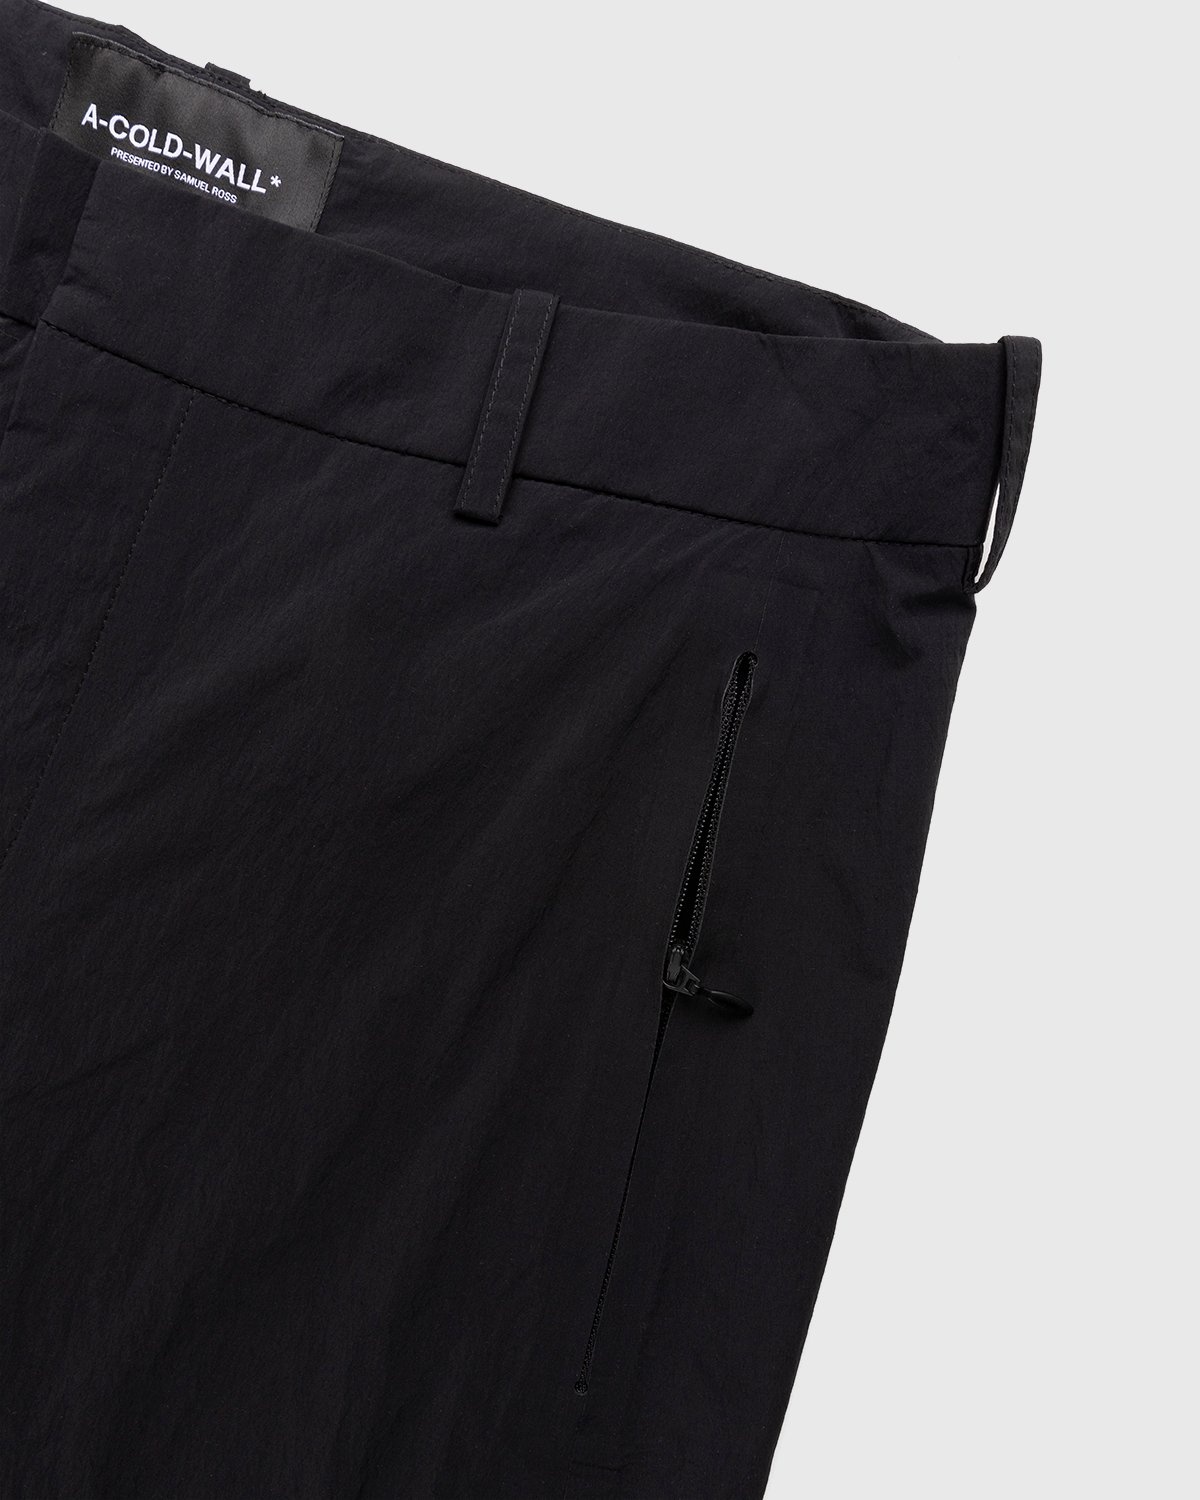 A-Cold-Wall* – Stealth Nylon Pant Black - Trousers - Black - Image 4